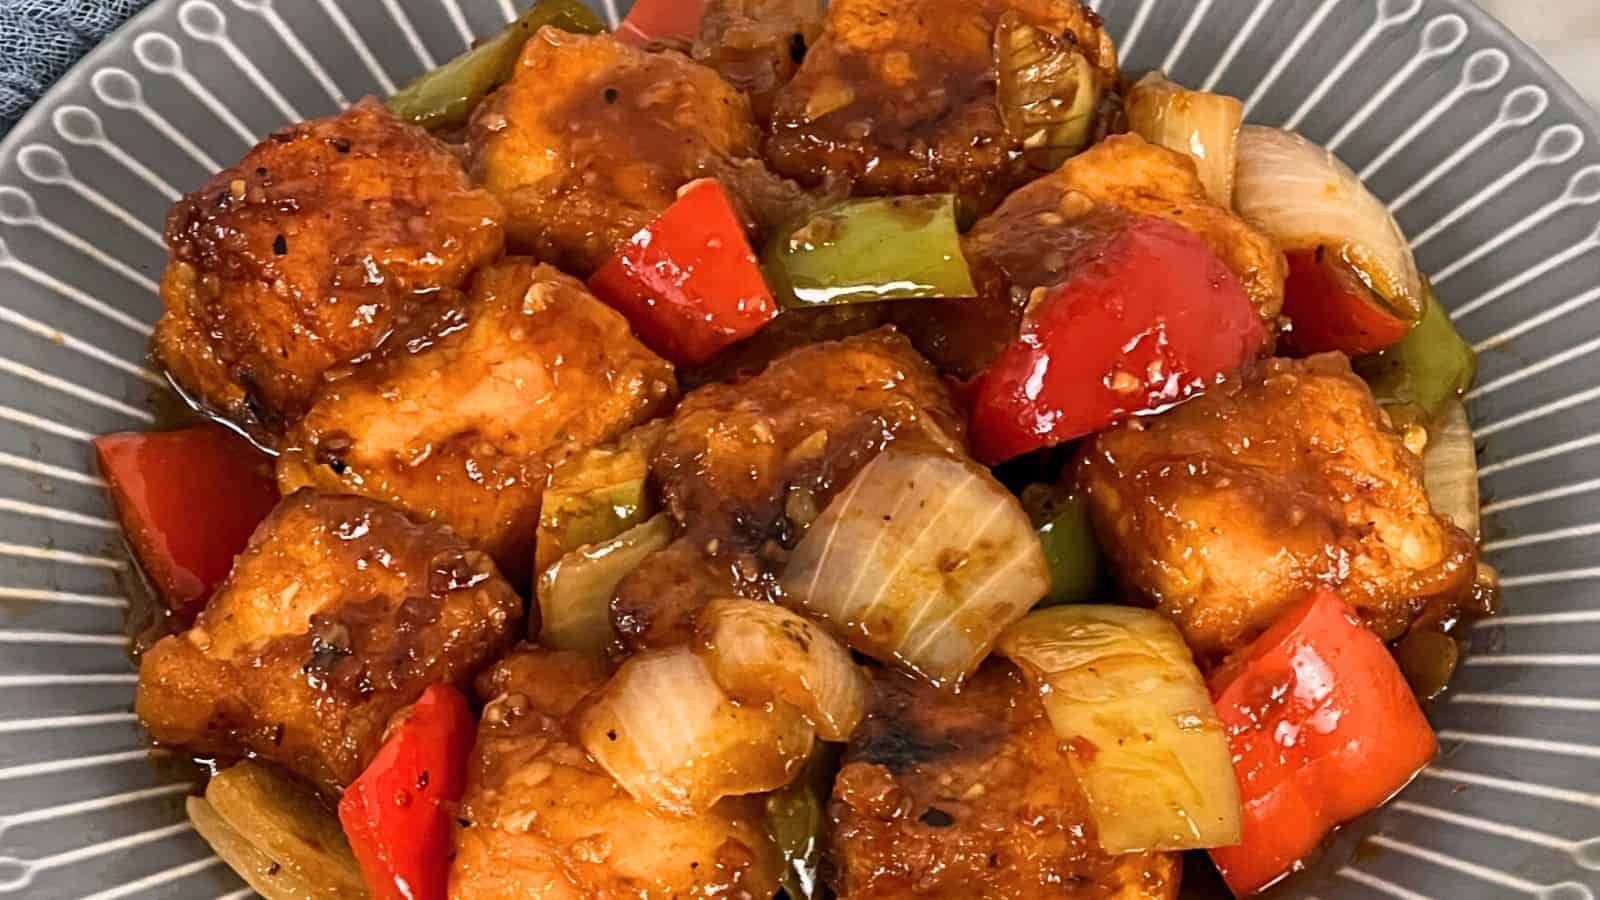 Bowl of Chilli Paneer with red bell peppers and onions in a glossy sauce.